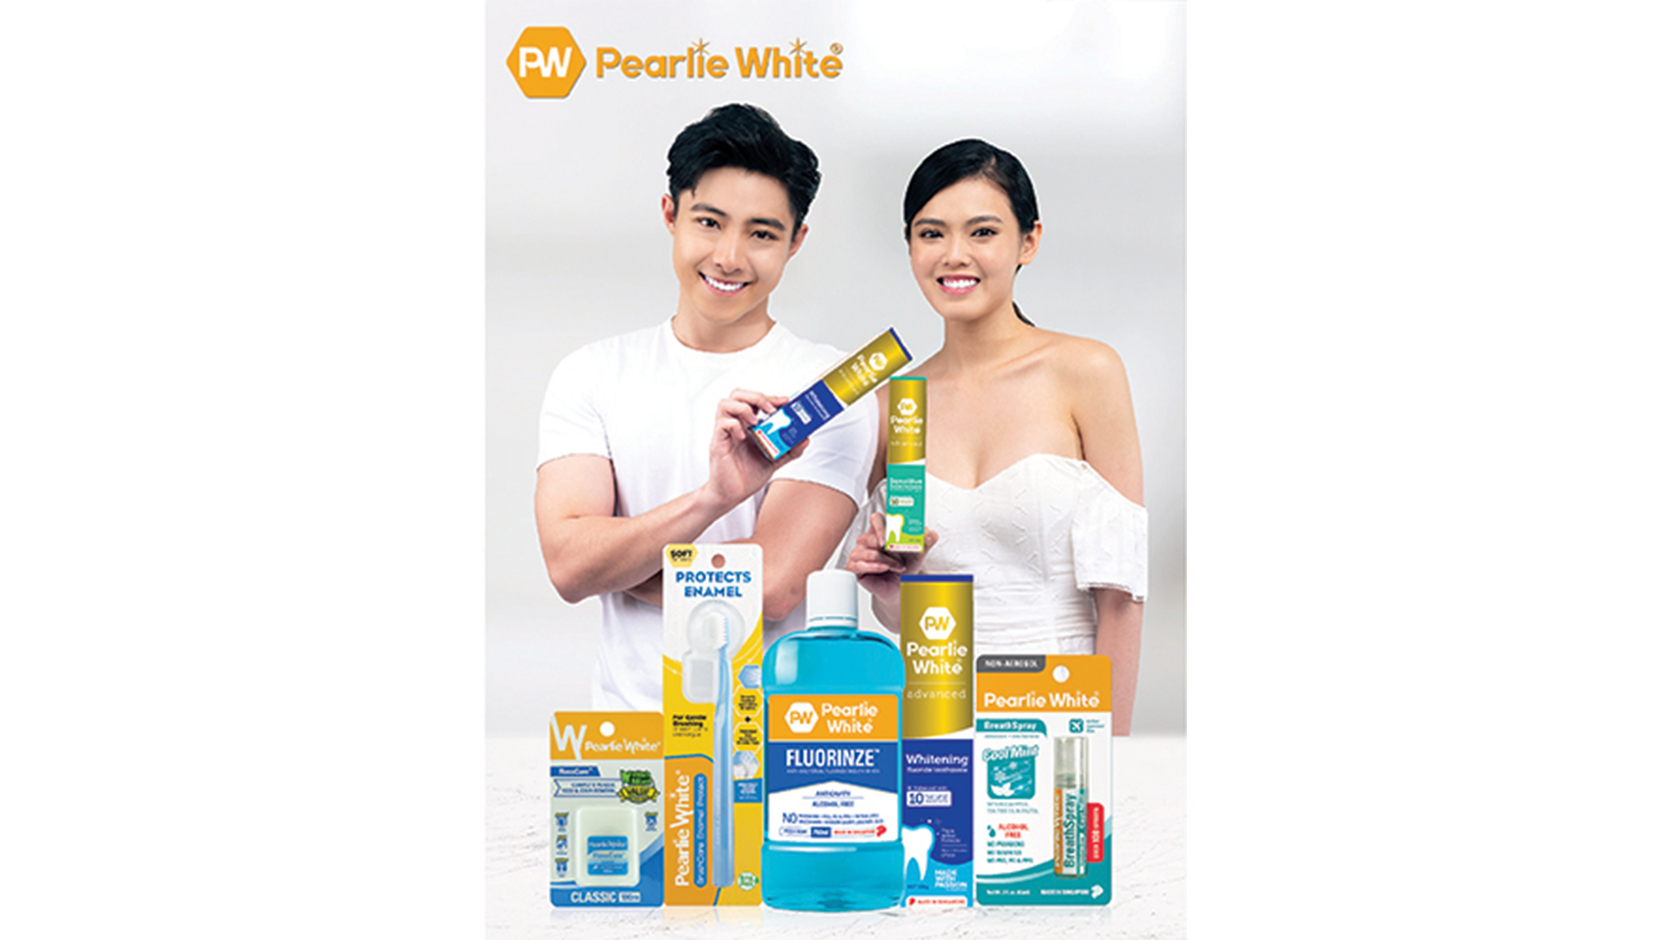 Products from Pearlie White